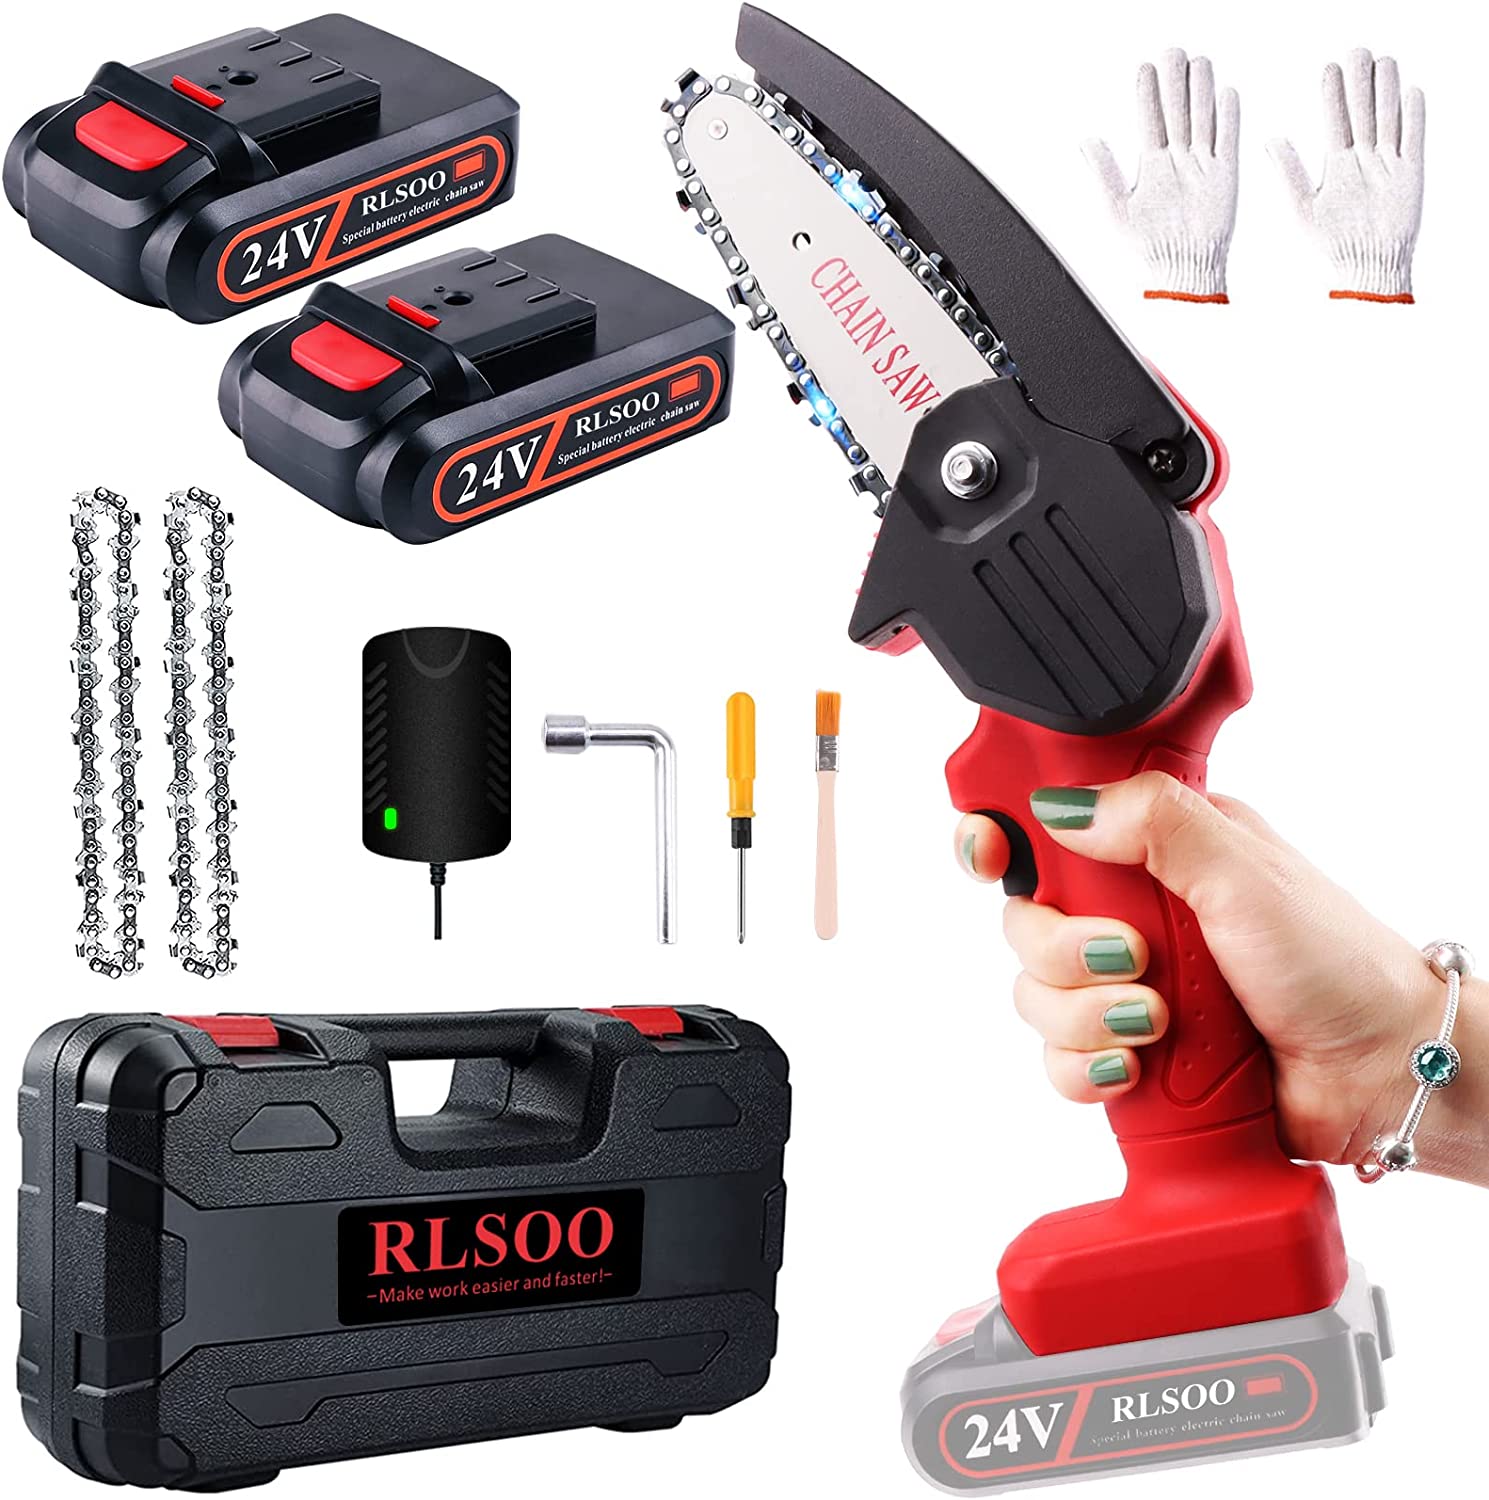 Mini Chainsaw, RLSOO Upgraded 4-Inch 24V Battery Powered Cordless Chainsaw, Portable One-Handed Rechargeable Electric Chainsaw